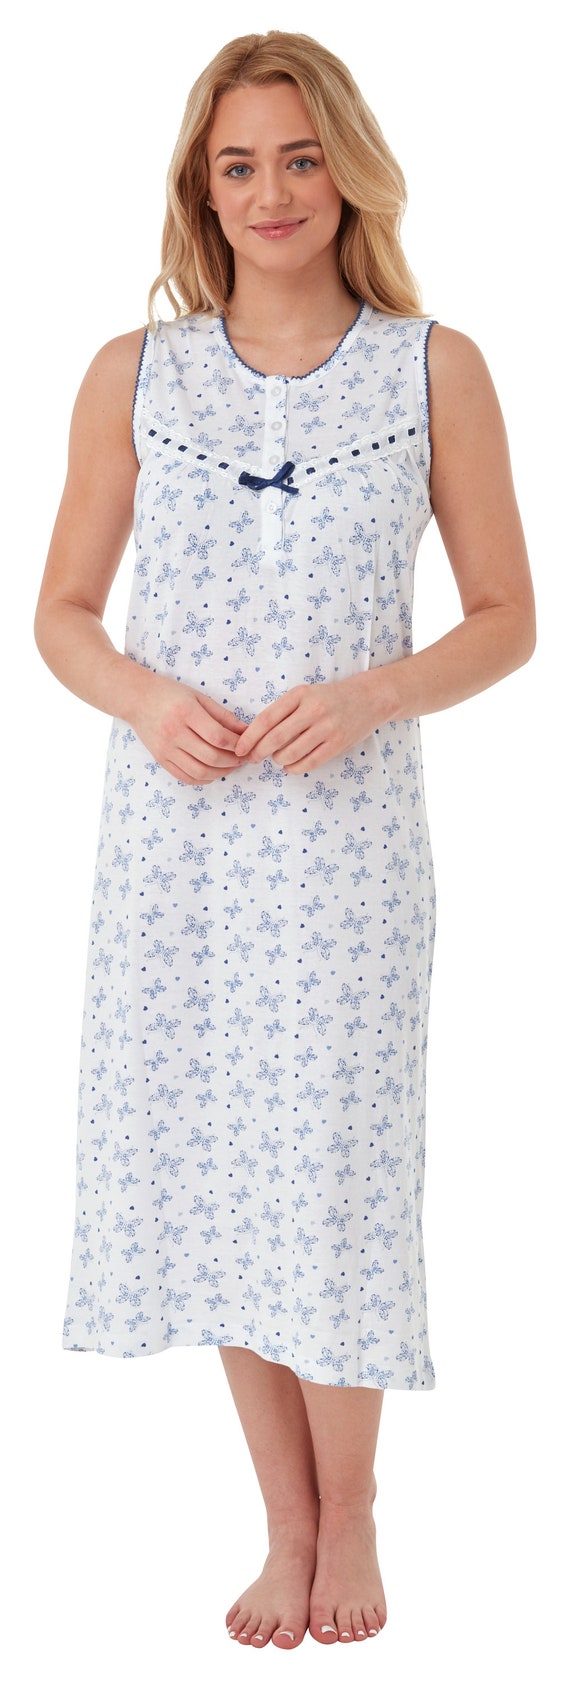 Ladies \'suzy & Me\' Sleeveless 100% Cotton Jersey Butterfly Print Nightdress.  Navy or Cerise. Sizes 8/10-24/26 - Etsy